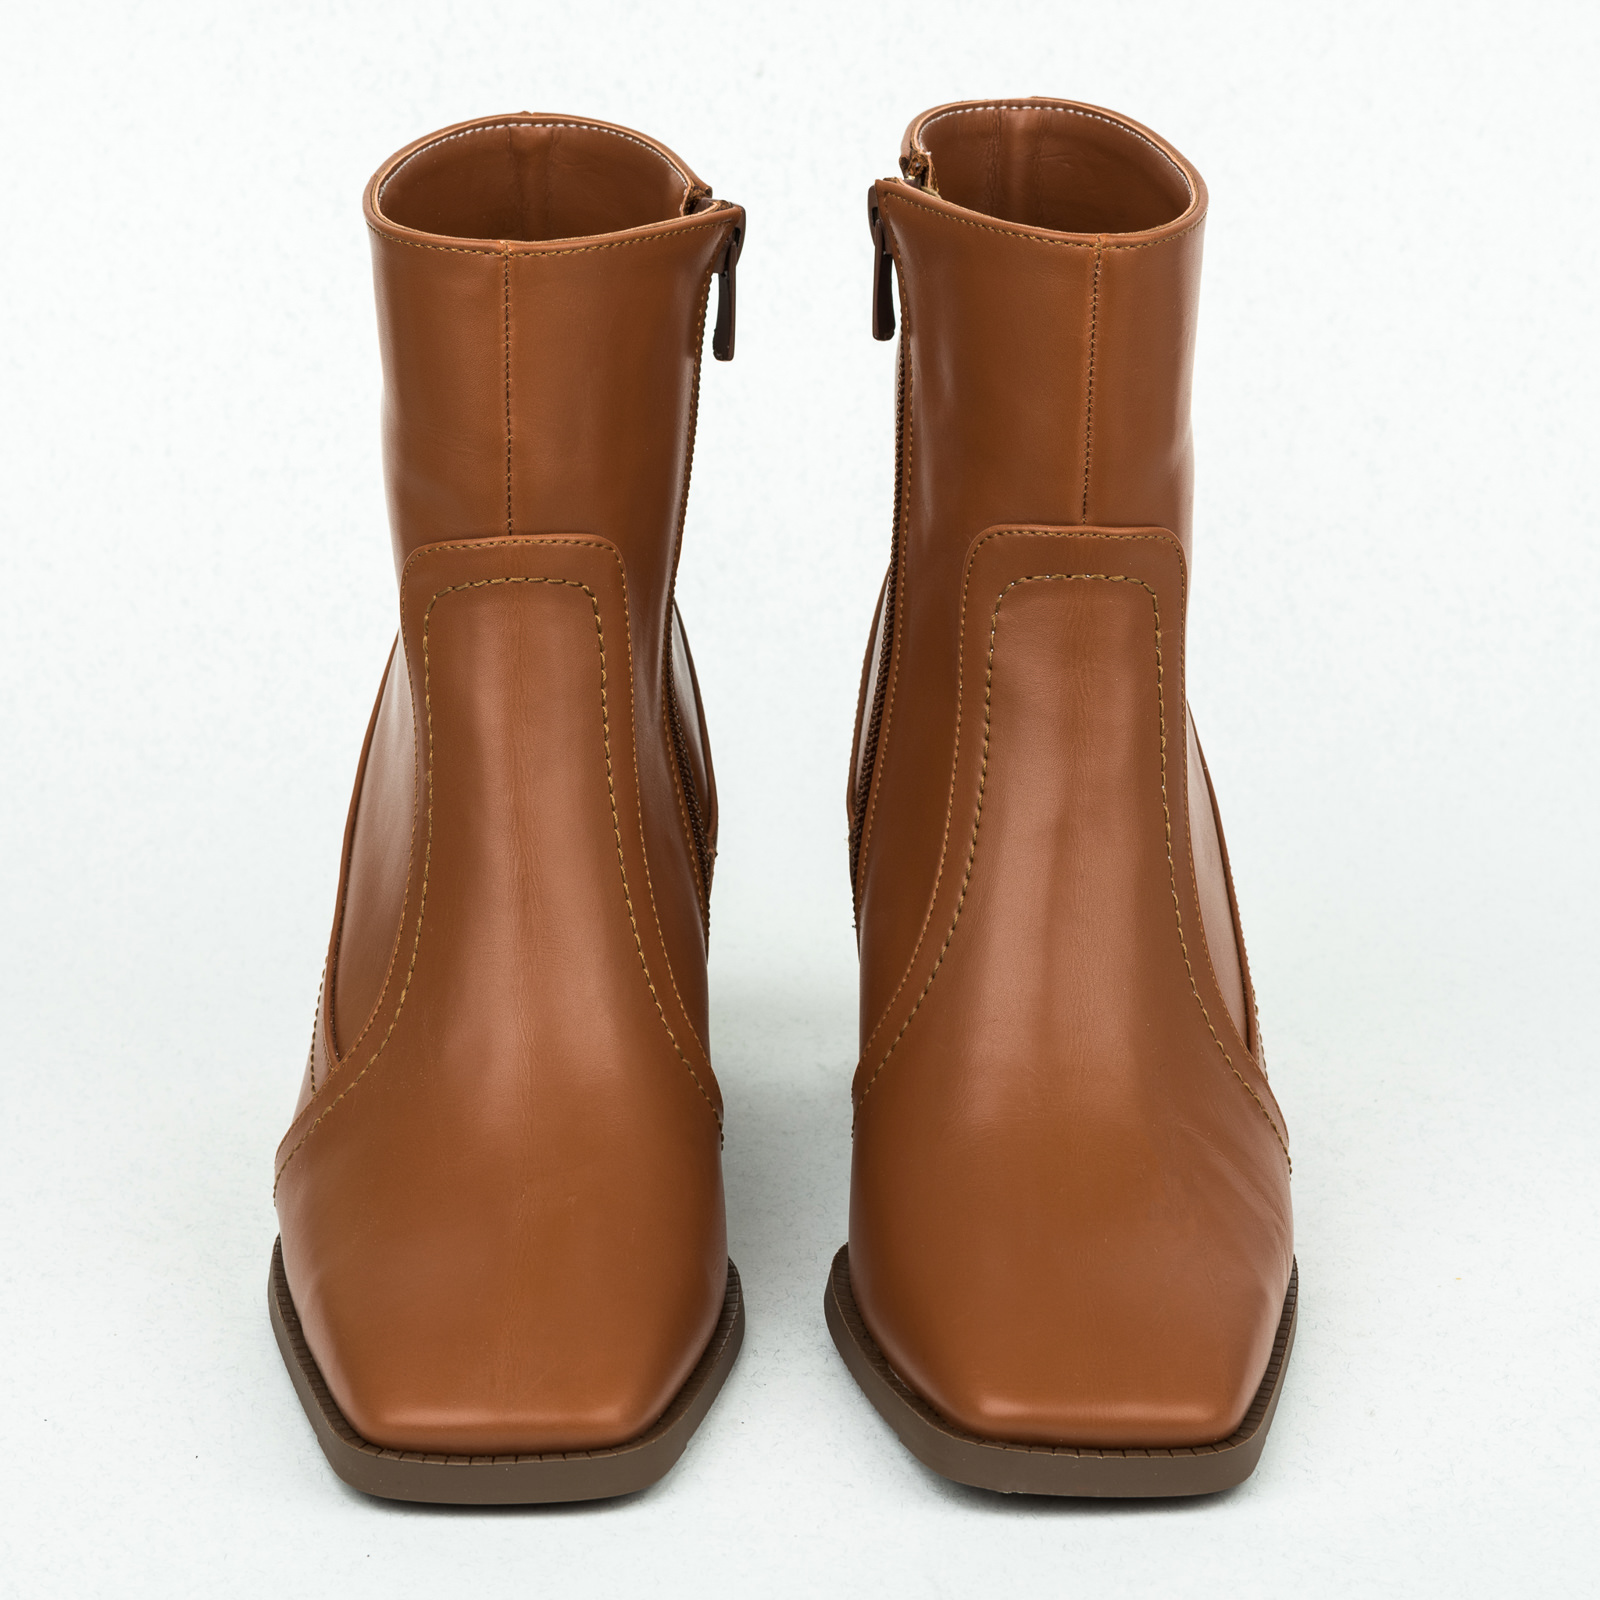 Women ankle boots B163 - CAMEL